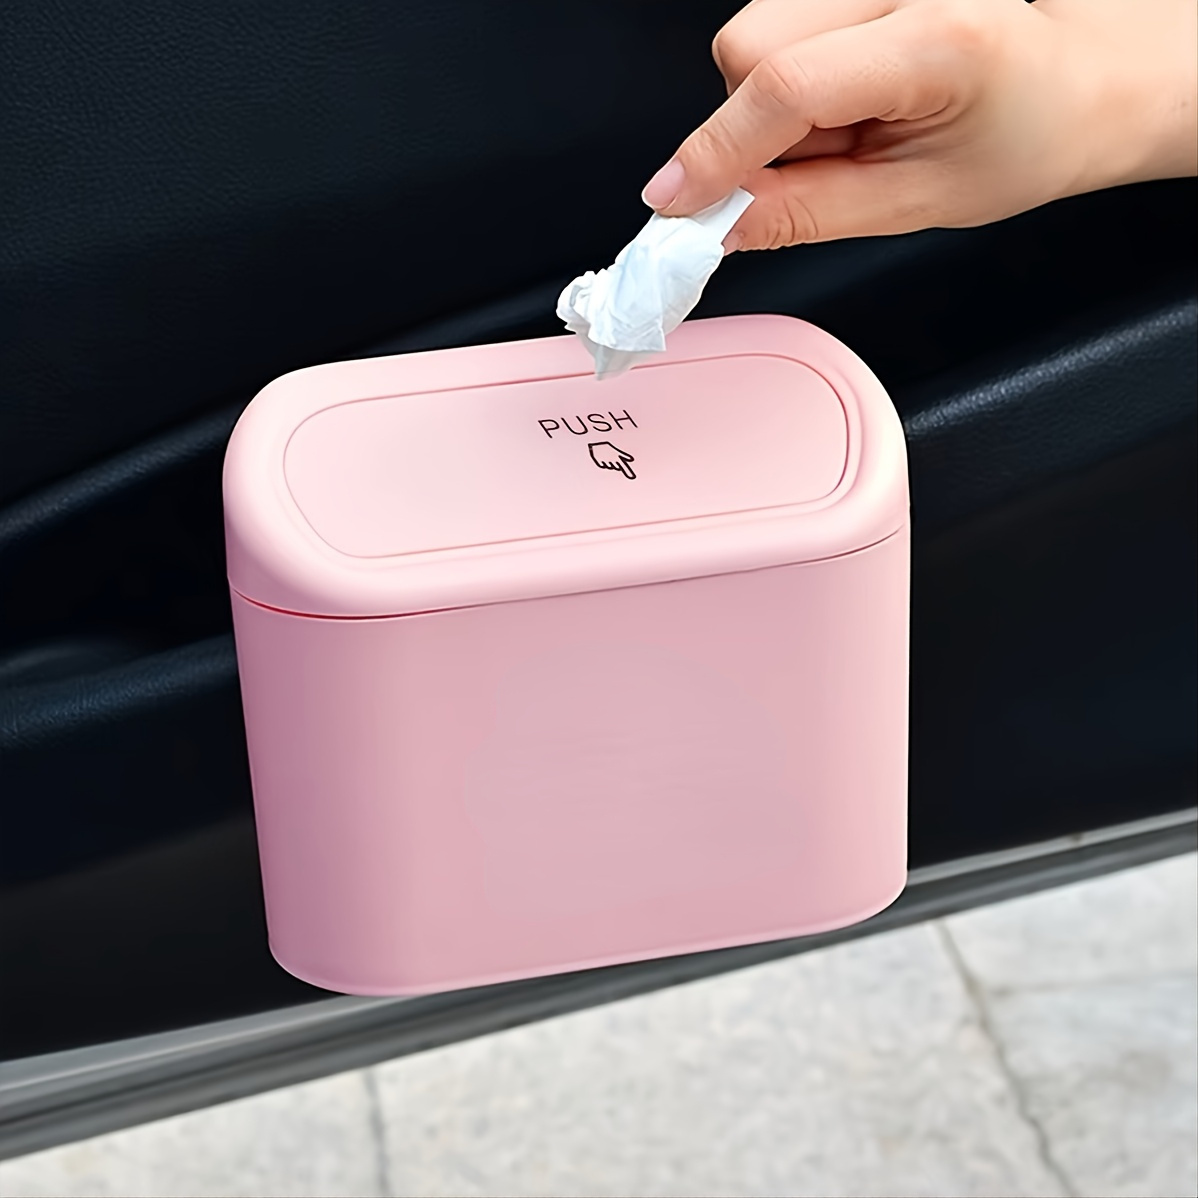 

Compact Flip-top Lid Car Trash Can - Durable, Easy To Clean Garbage Bin For Vehicle Use